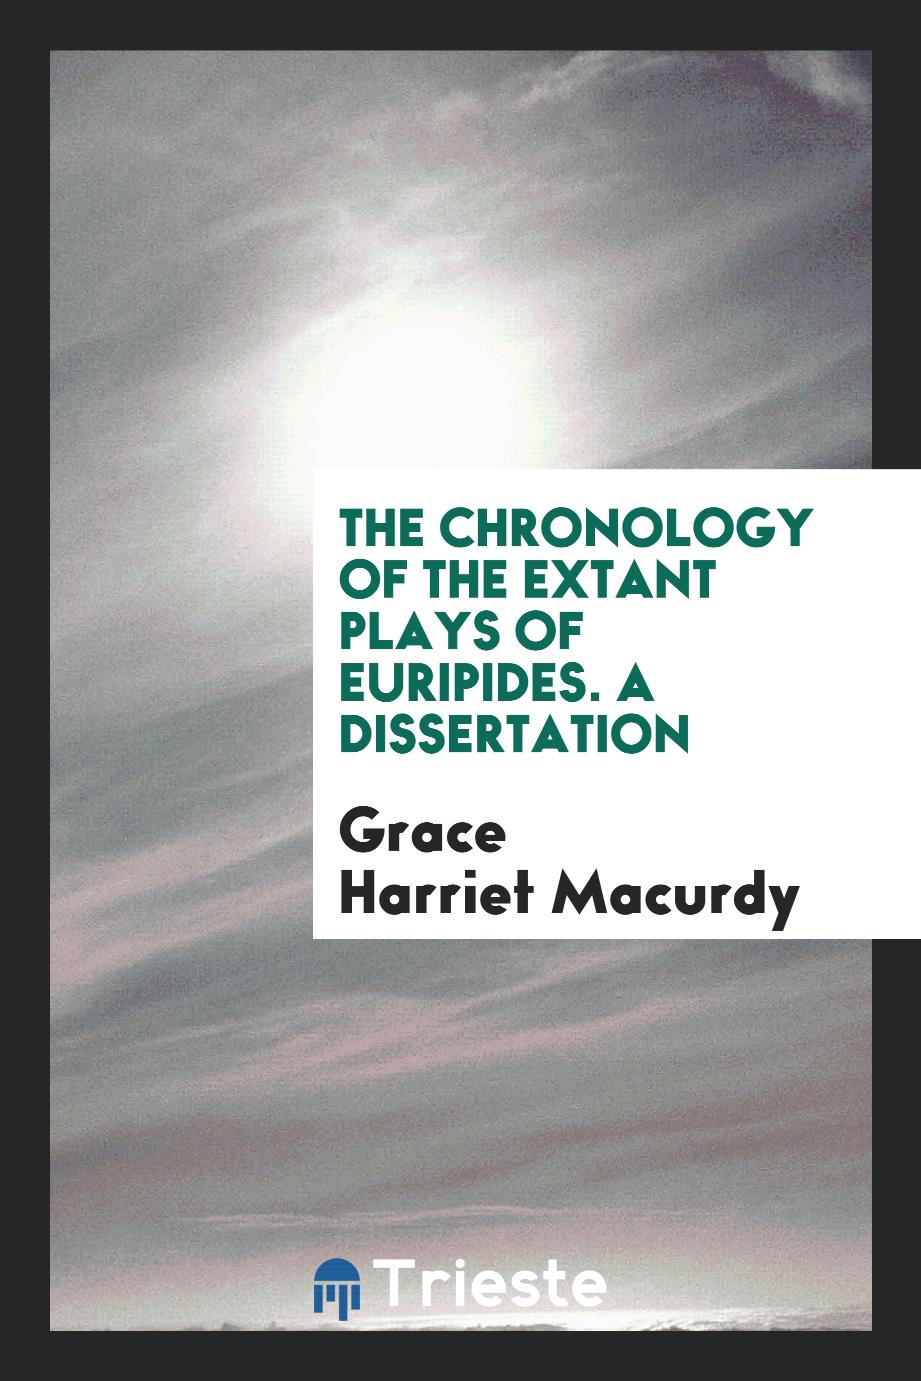 The Chronology of the Extant Plays of Euripides. A Dissertation